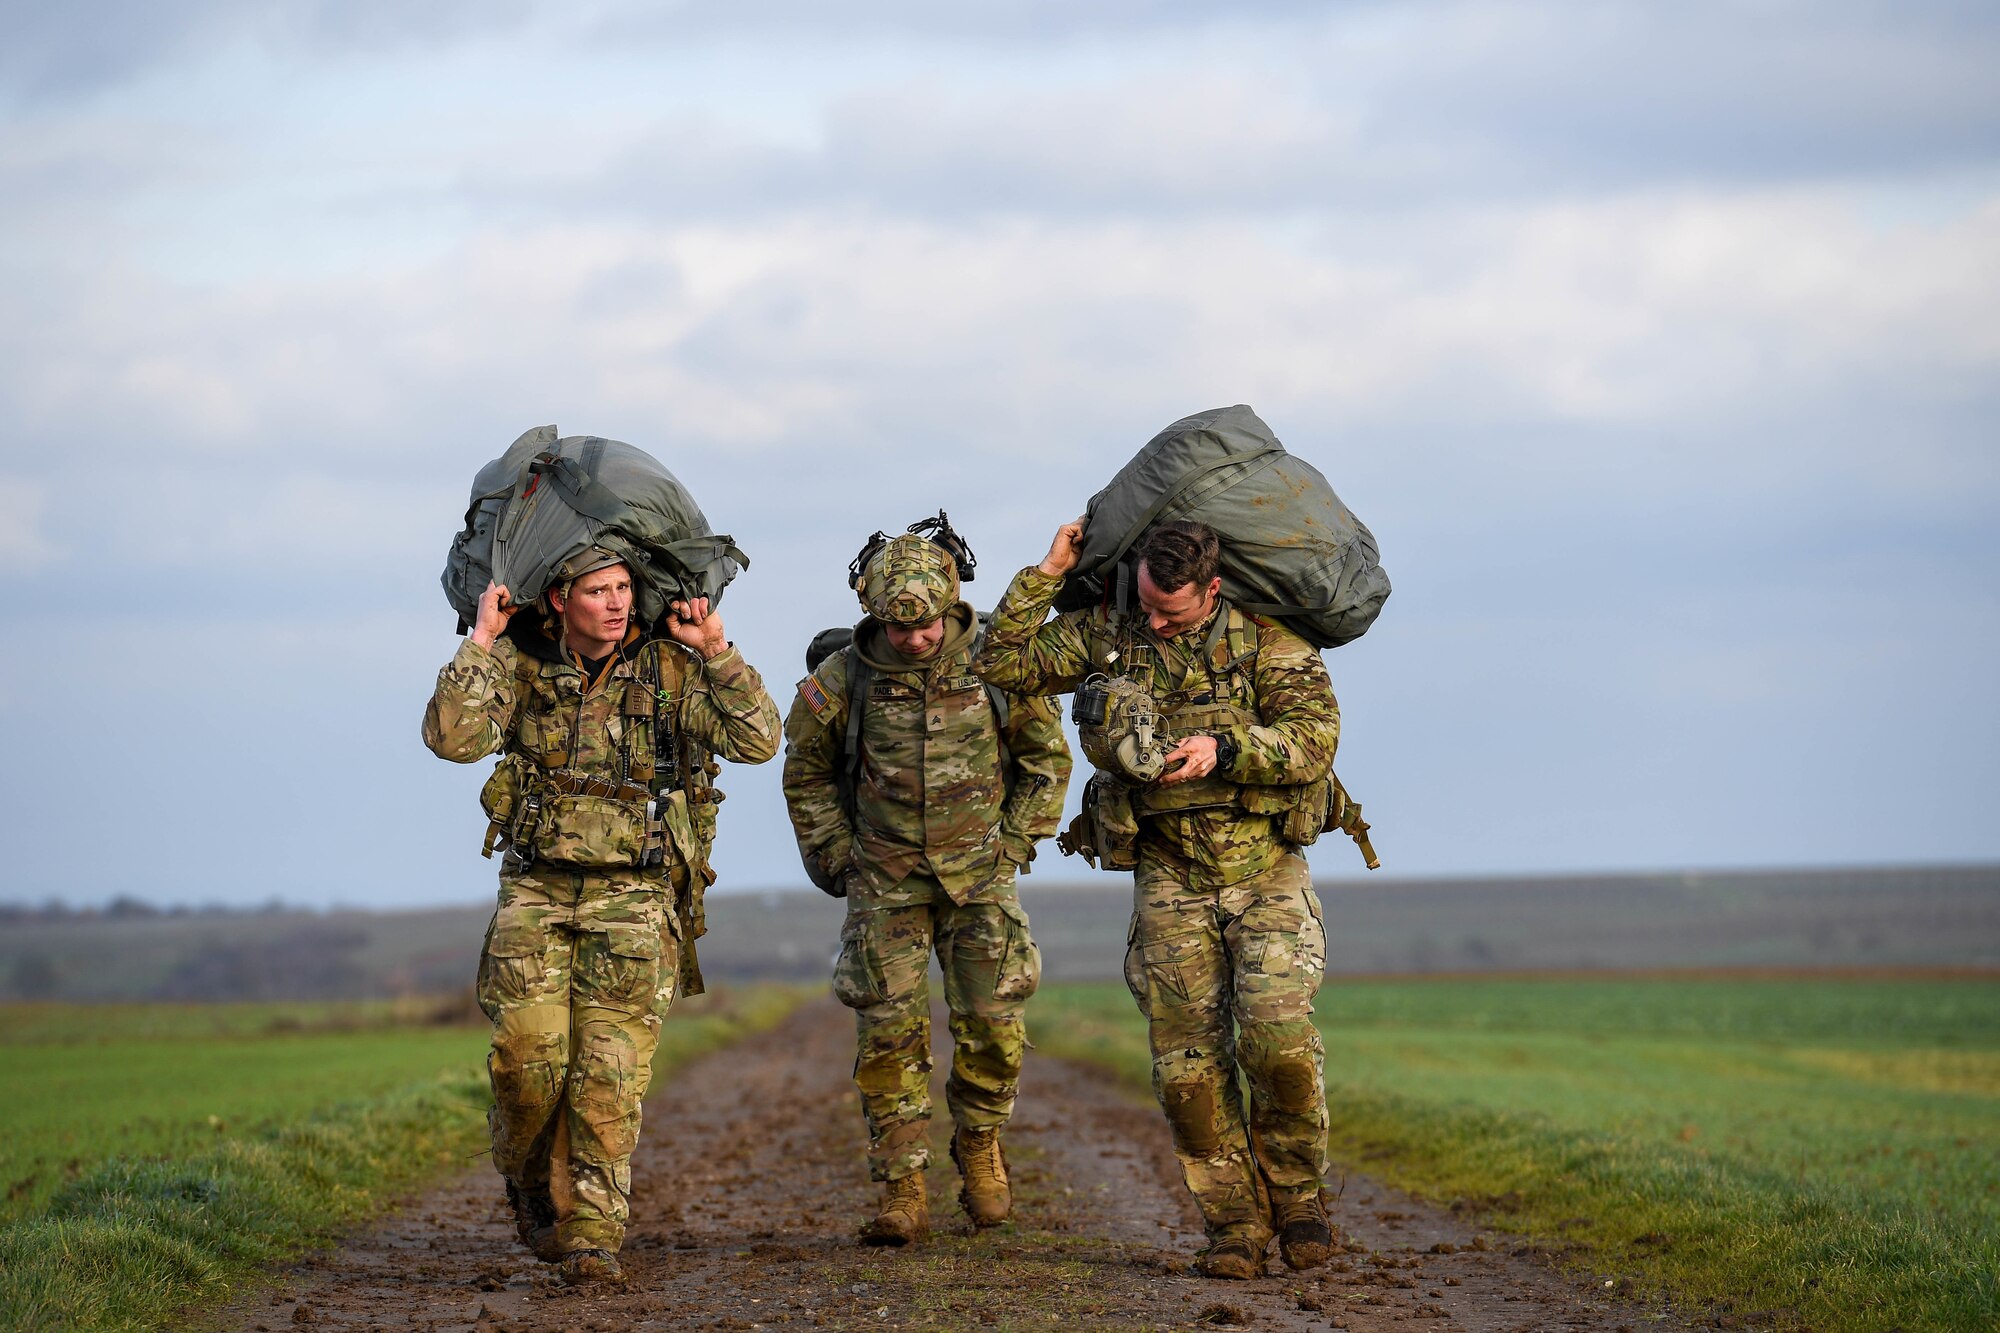 U.S. Army paratroopers from the 173rd Airborne Brigade and the 1st Battalion, 10th Special Forces Group, carry their gear after a jump into Alzey Drop Zone in Ober-Flörsheim, Germany, Jan. 20, 2023.